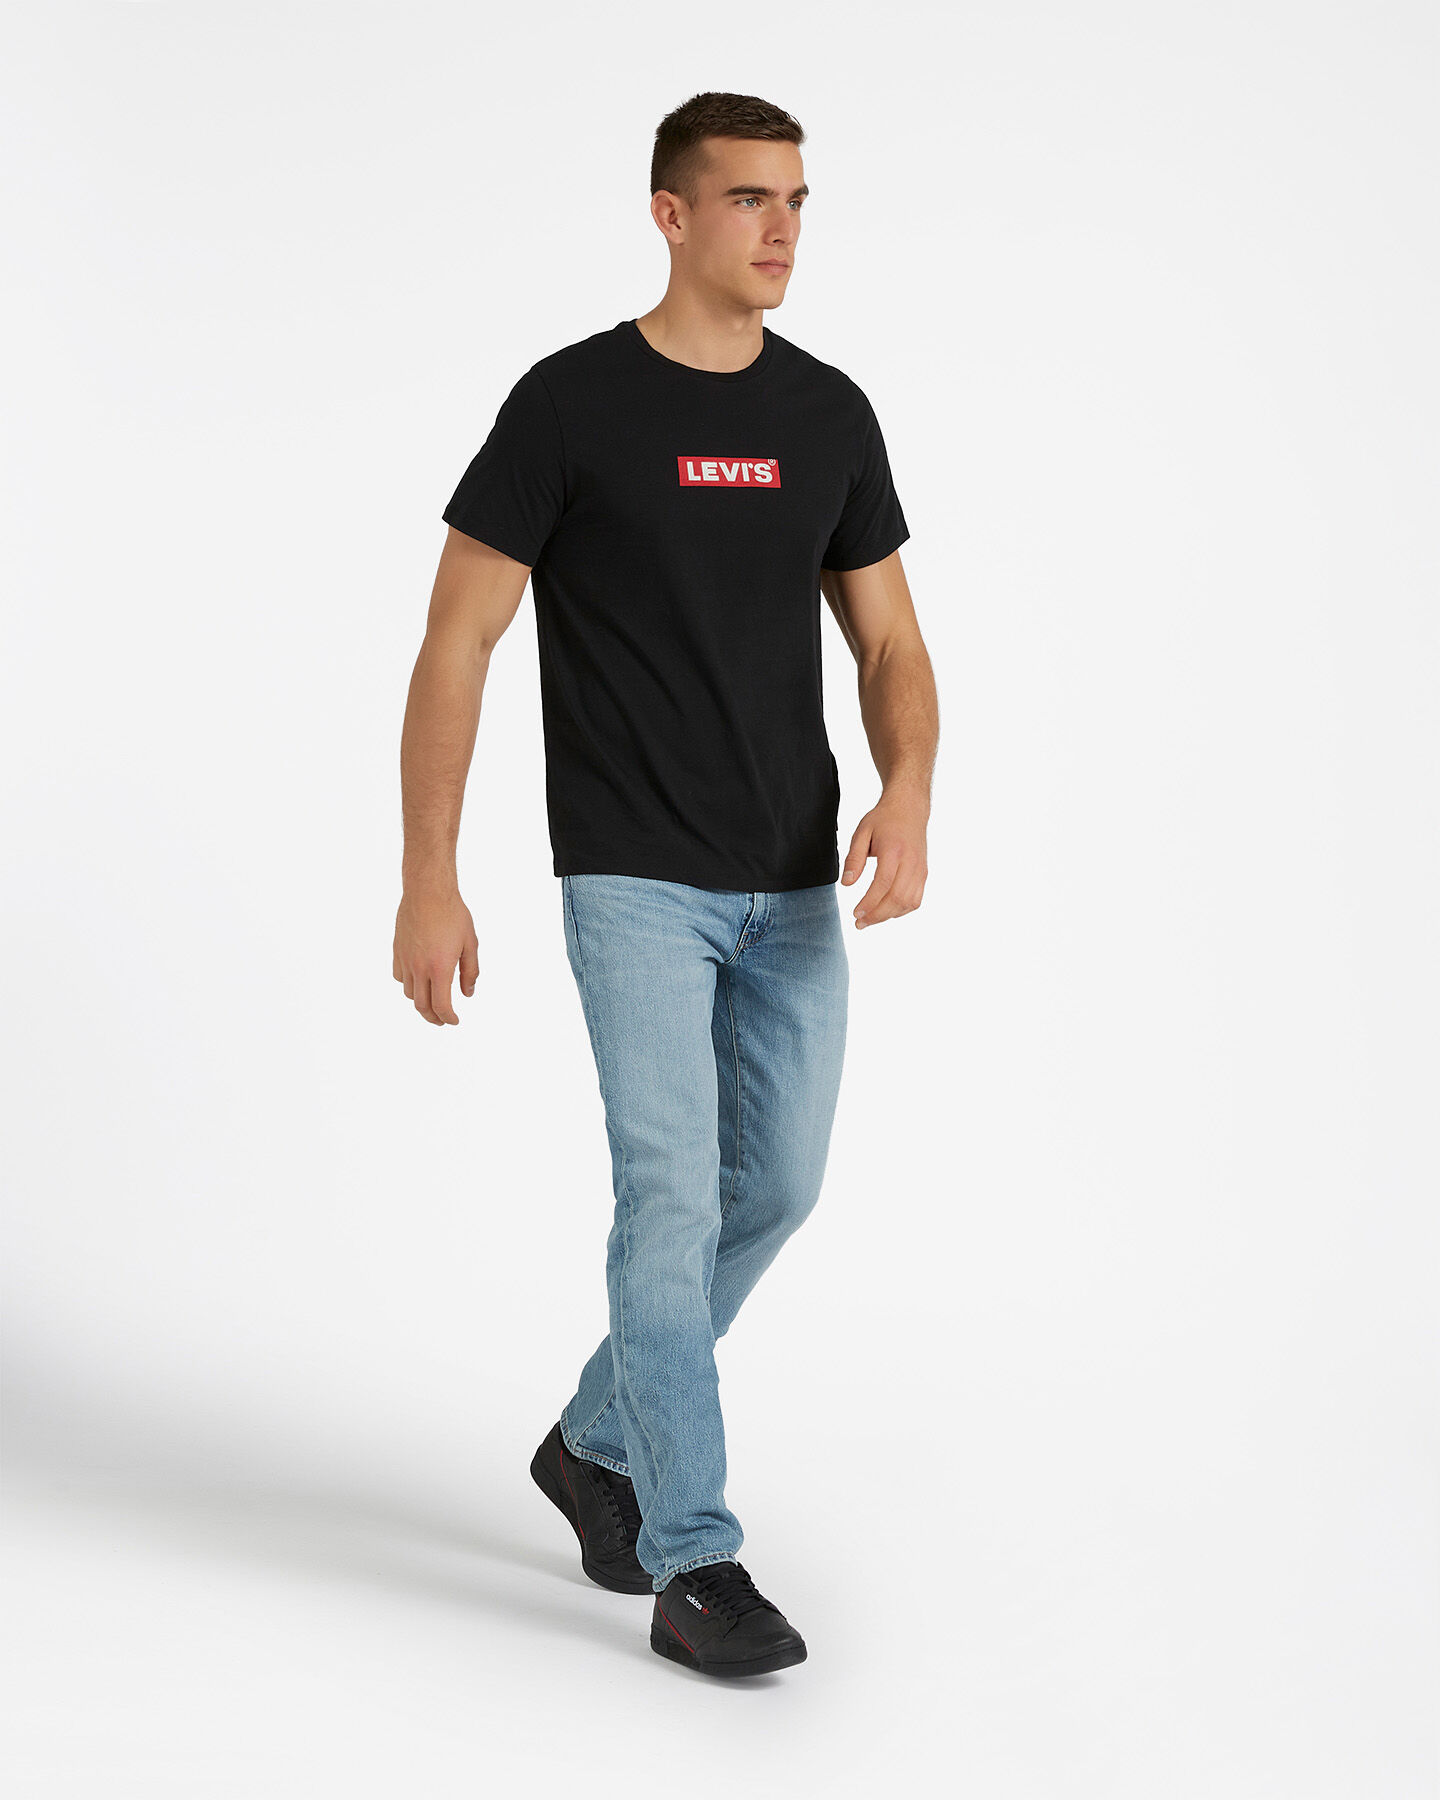  T-Shirt LEVI'S BOXTAB GRAPHIC M S4076920|002|XS scatto 3